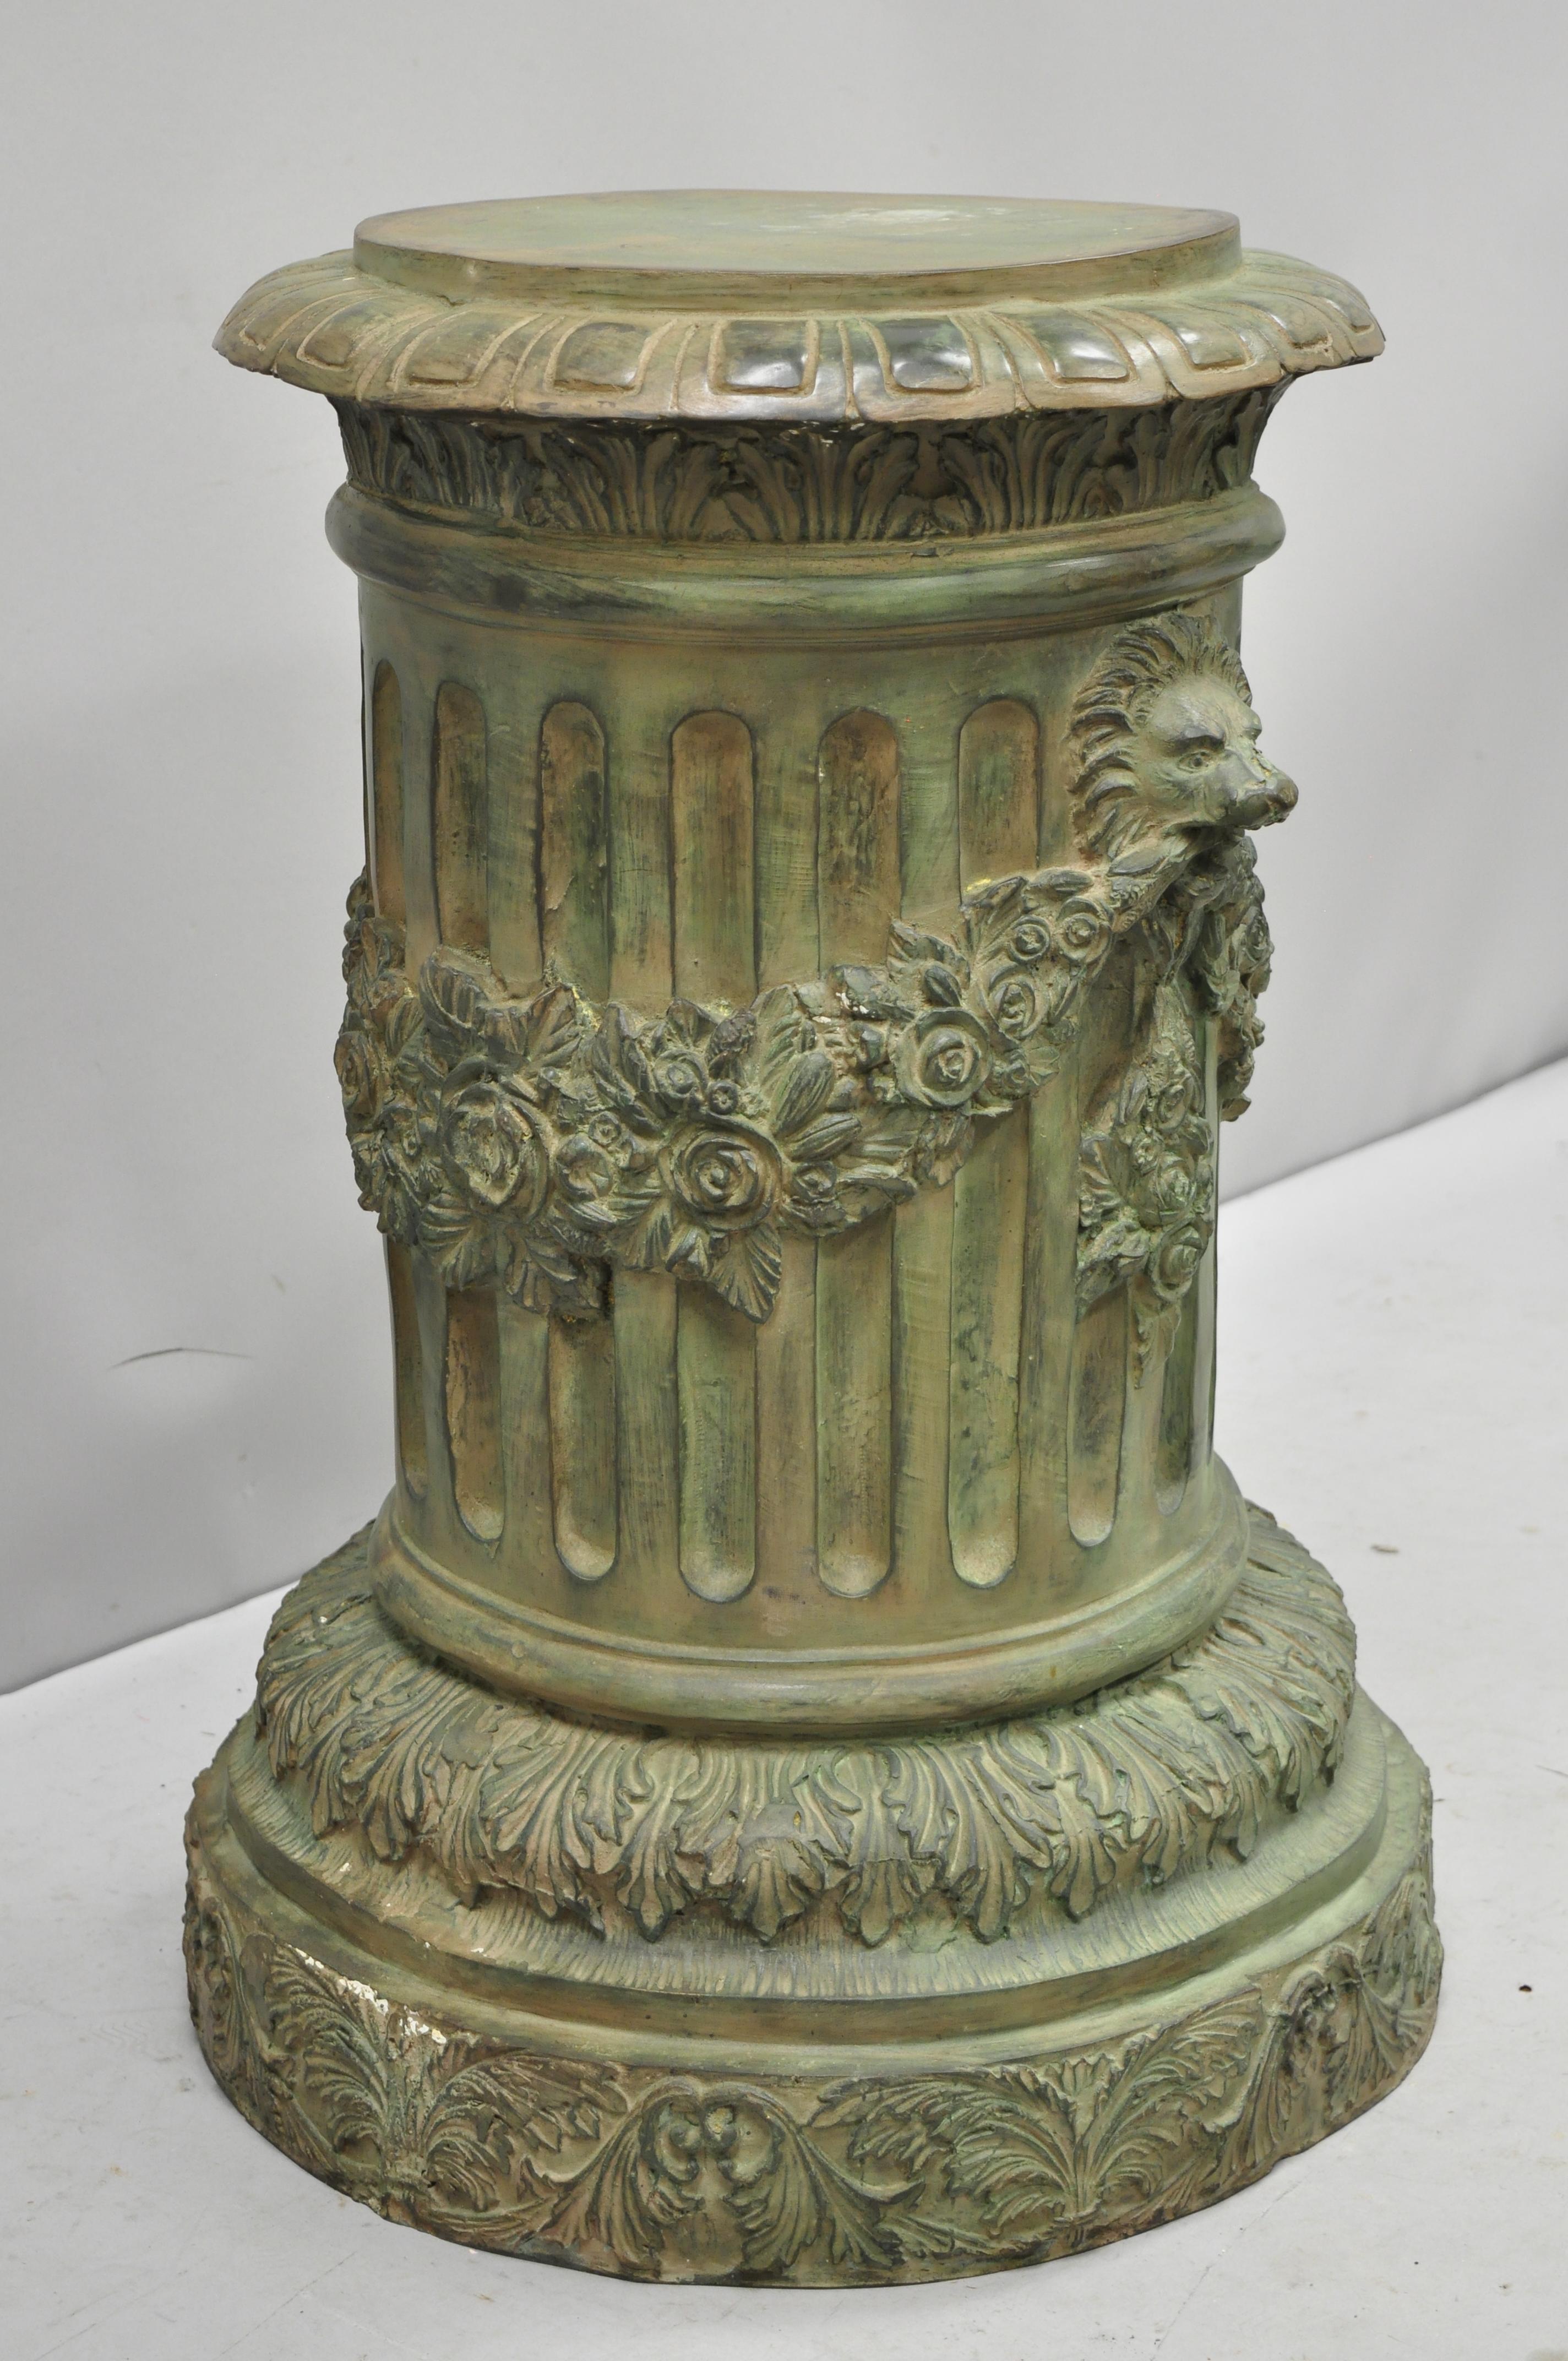 French neoclassical style bronze fluted column pedestal dining center table base with lions. Item features cast bronze pedestal table base, fluted column form, drapes and lions, green patinated finish, great style and form, weighs approximately